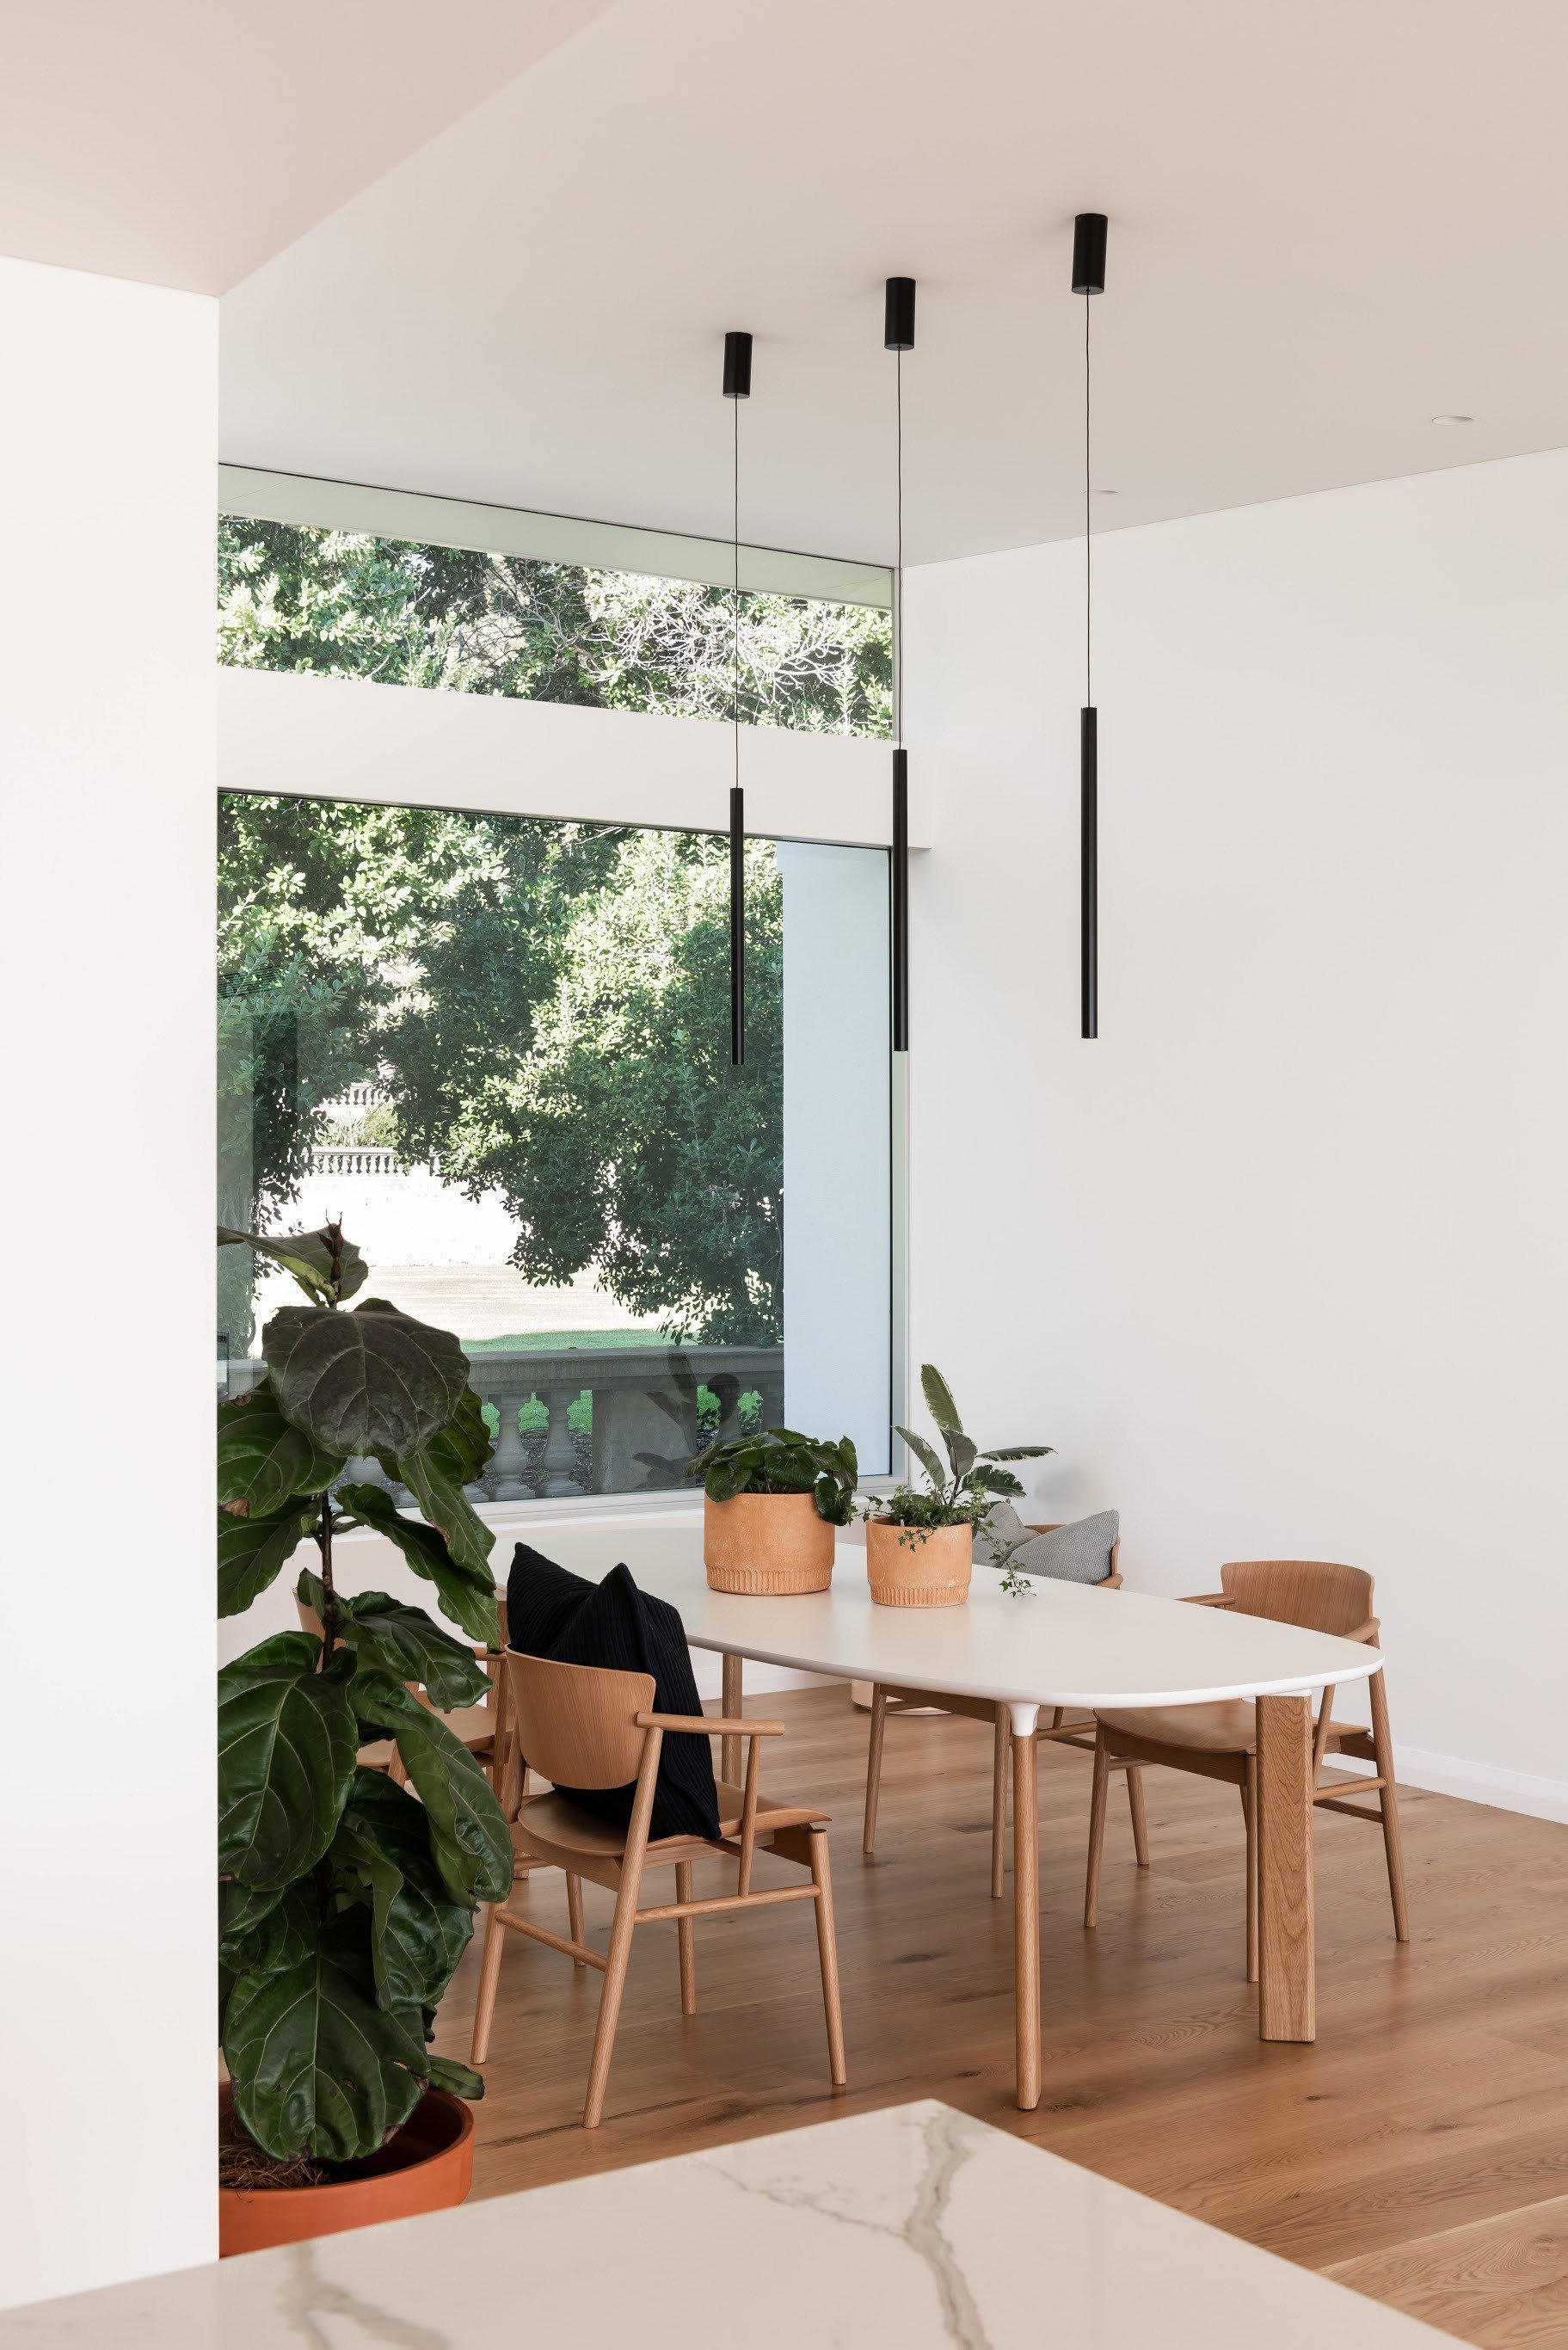 Modernist apartments - Overton Terraces - Braham architects - dining area